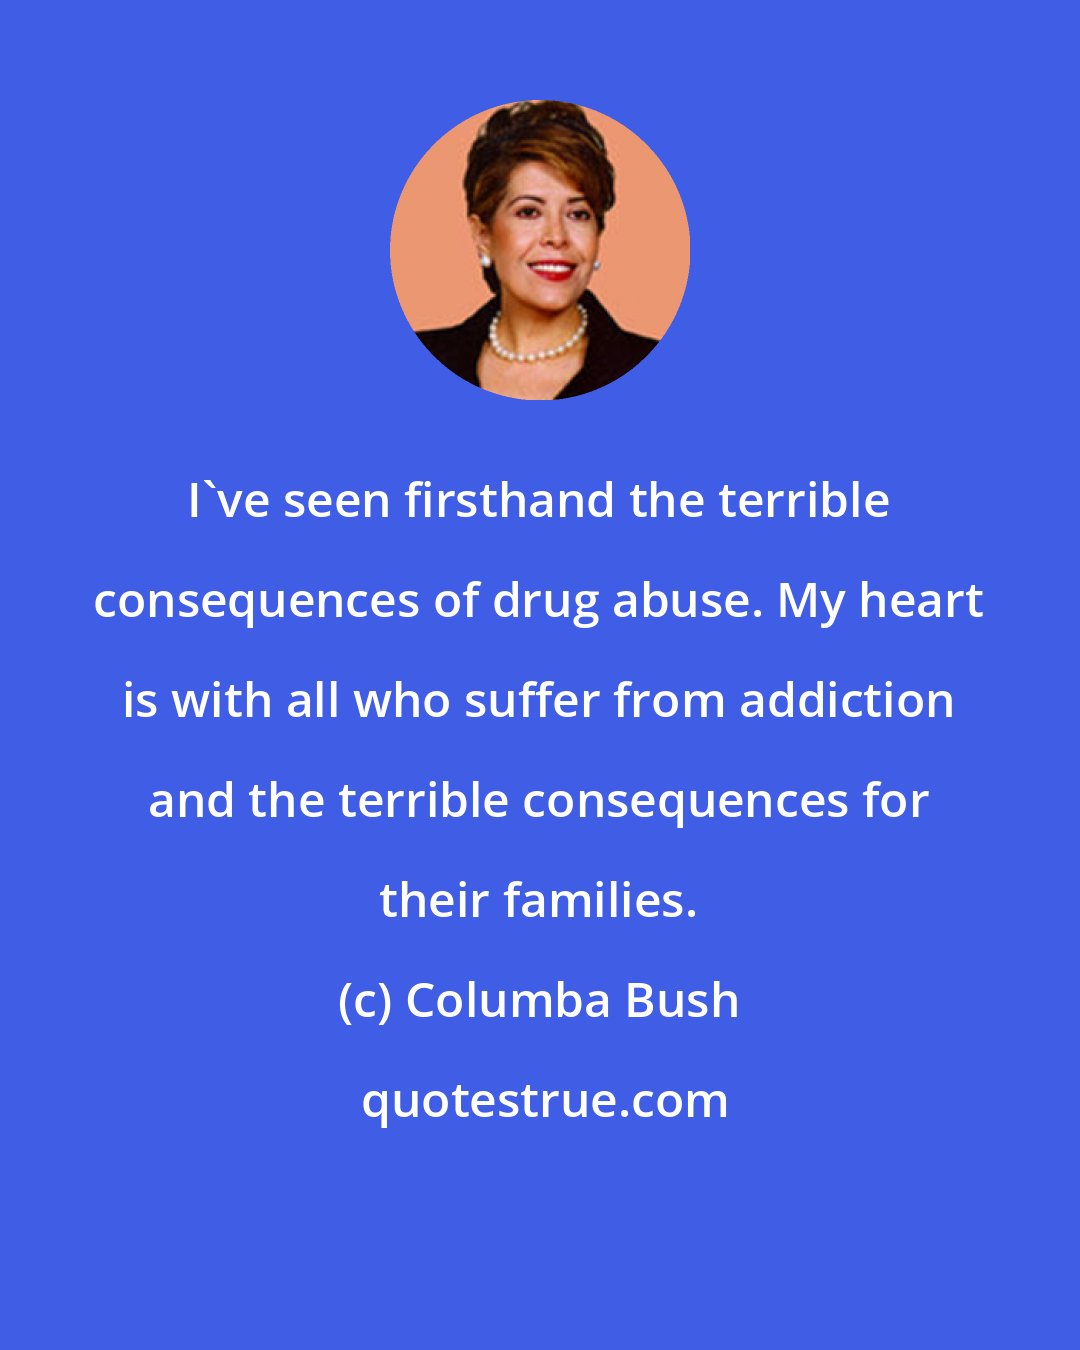 Columba Bush: I've seen firsthand the terrible consequences of drug abuse. My heart is with all who suffer from addiction and the terrible consequences for their families.